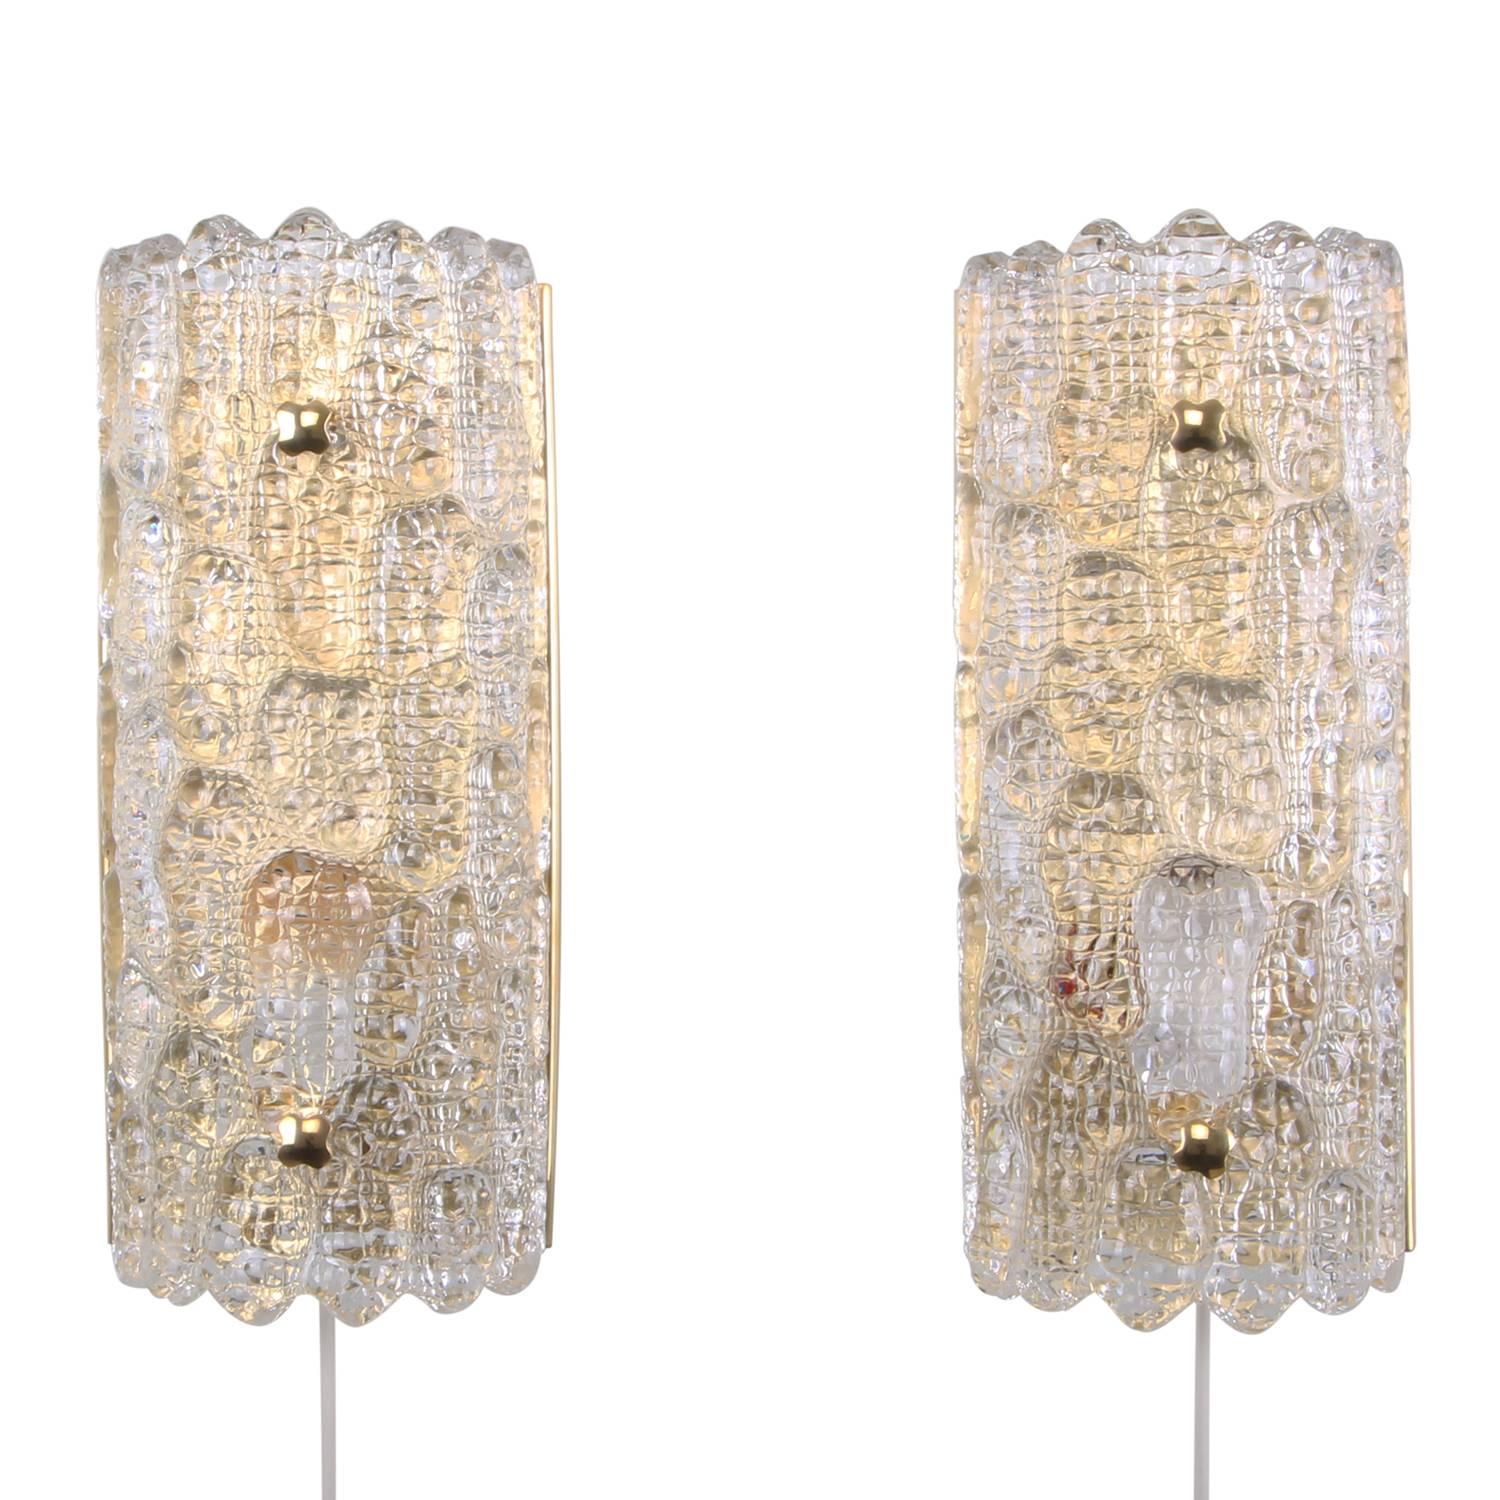 Scandinavian Modern Gefion Sconces 'Pair', Crystal Glass Wall Lights by Lyfa and Orrefors, 1960s For Sale